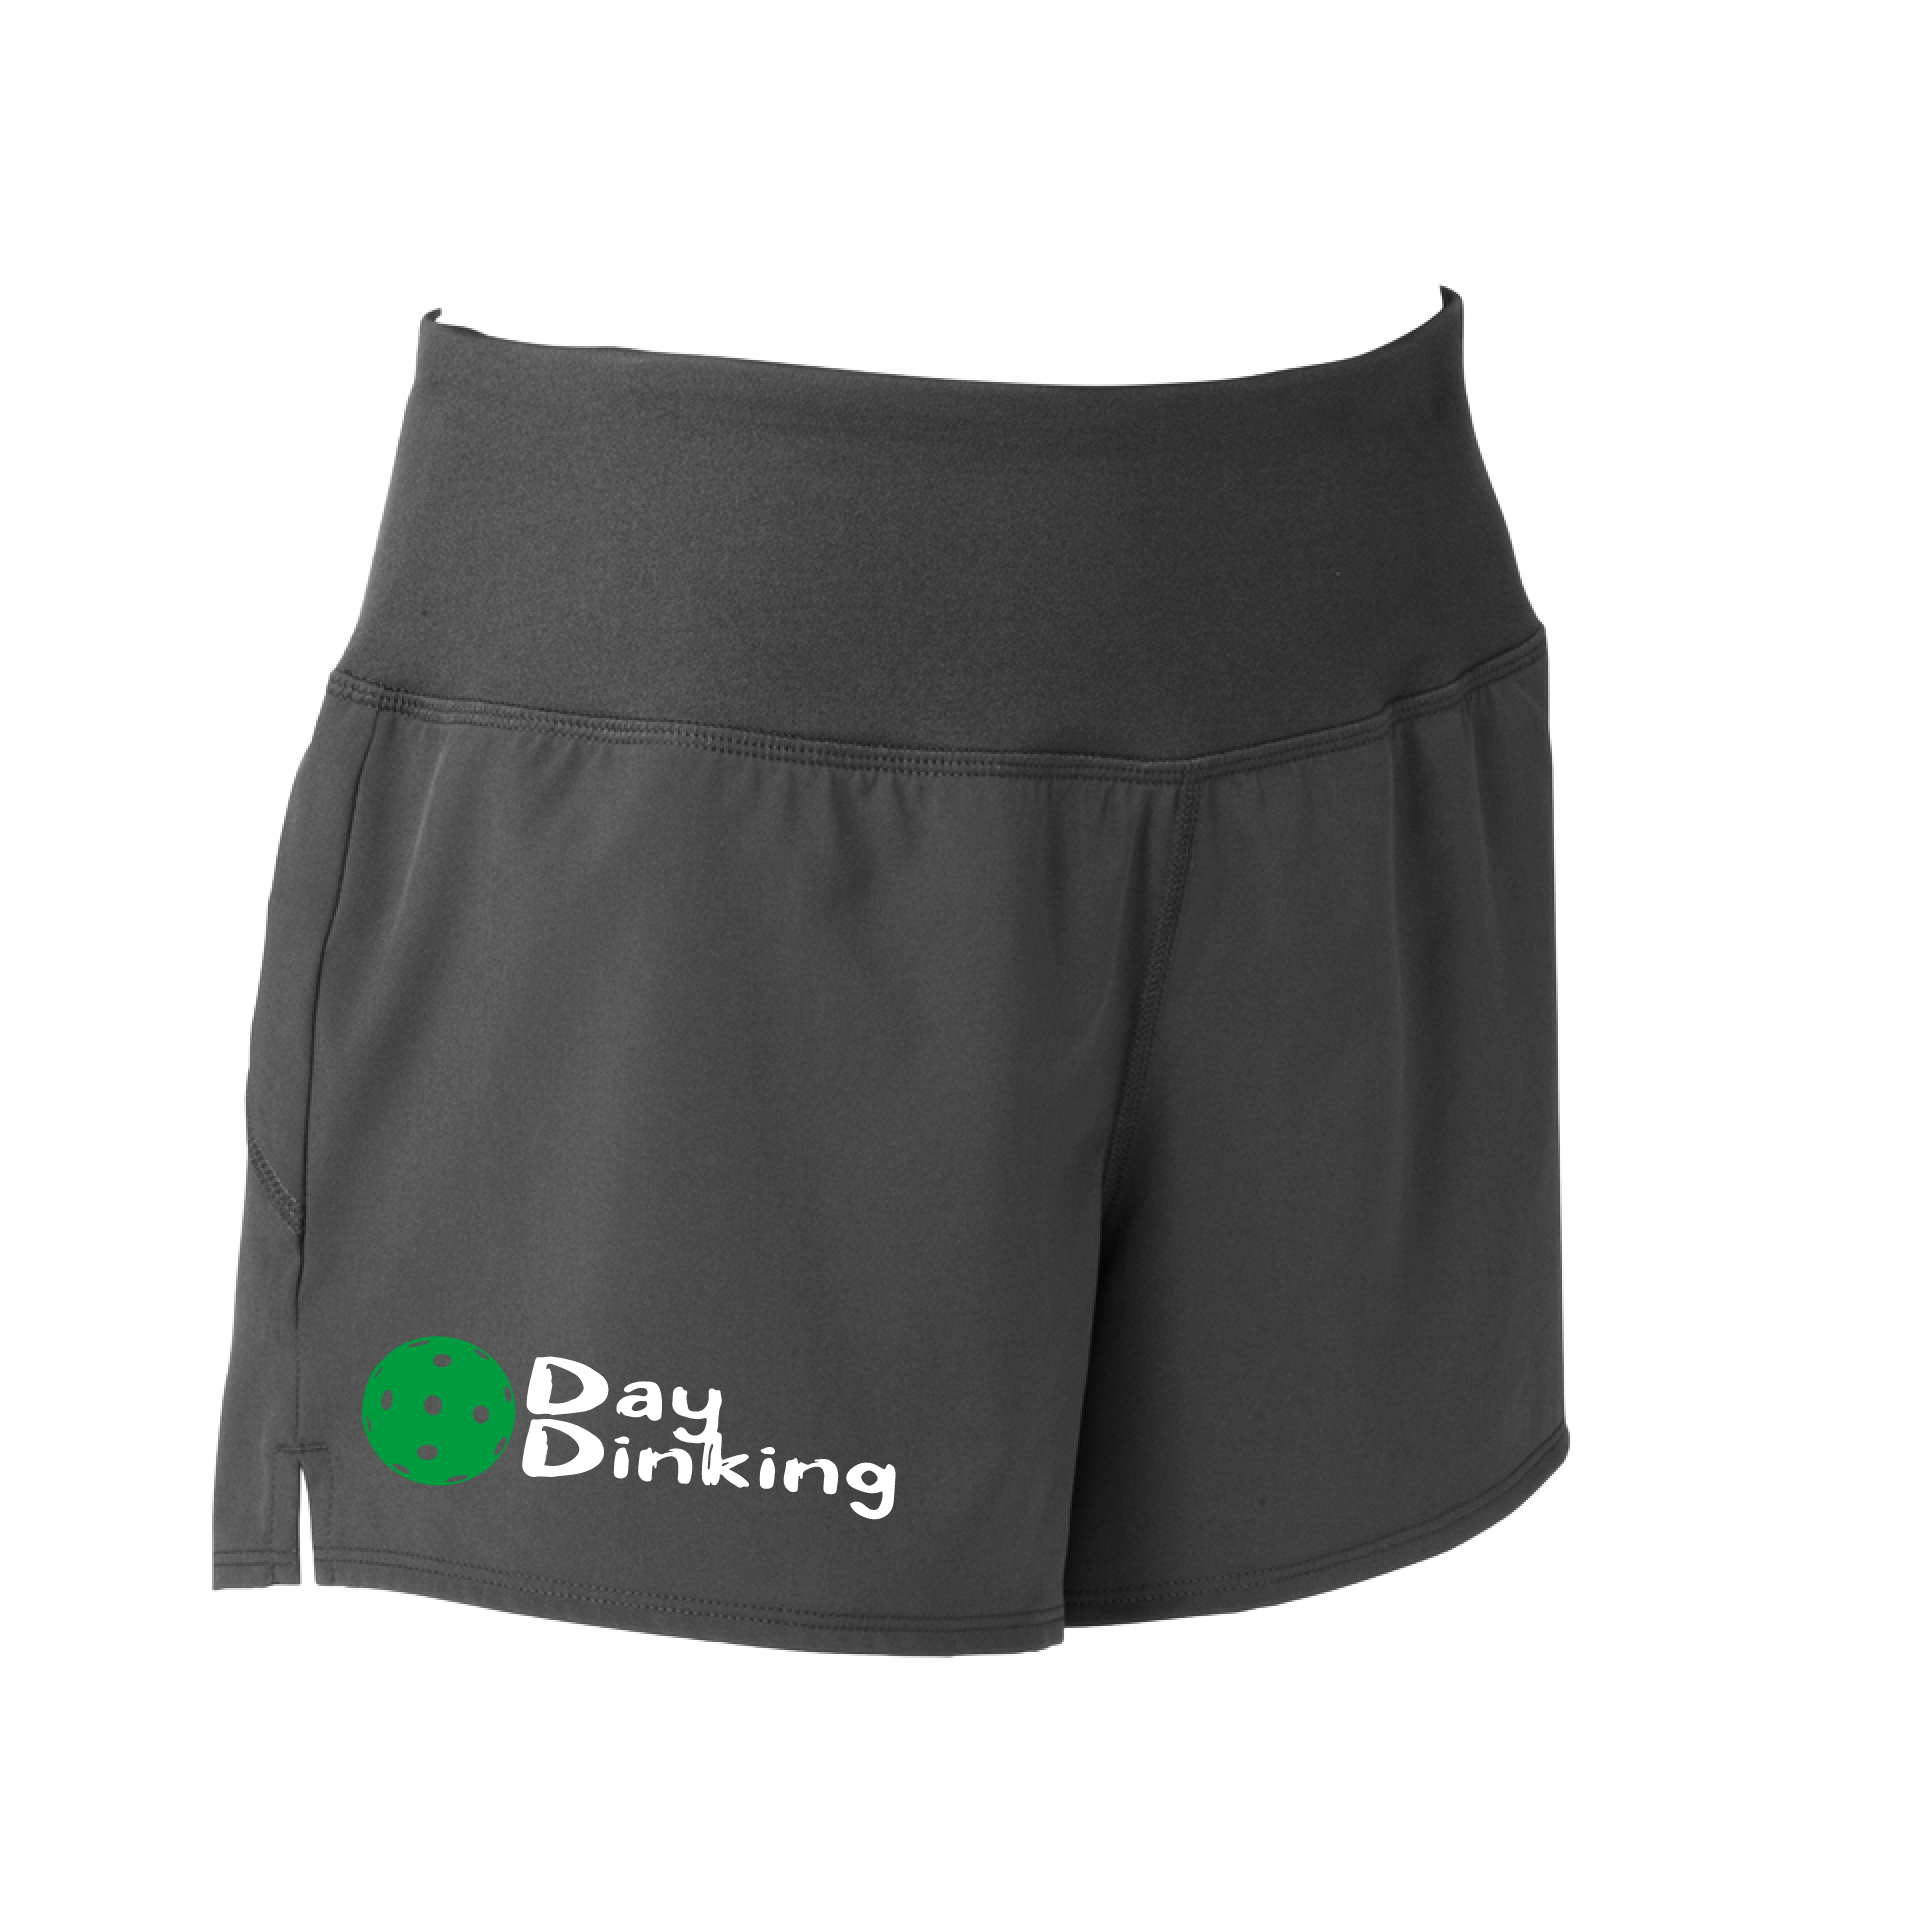 Shorts Designs: Day Dinking with Customizable Pickleball Color (Cyan, Green, Orange, & Pink).  Sport Tek women’s repeat shorts come with built-in cell phone pocket on the exterior of the waistband. You can also feel secure knowing that no matter how strenuous the exercise, the shorts will remain in place (it won’t ride up!). These shorts are extremely versatile and trendy. Transition from the Pickleball court to running errands smoothly.